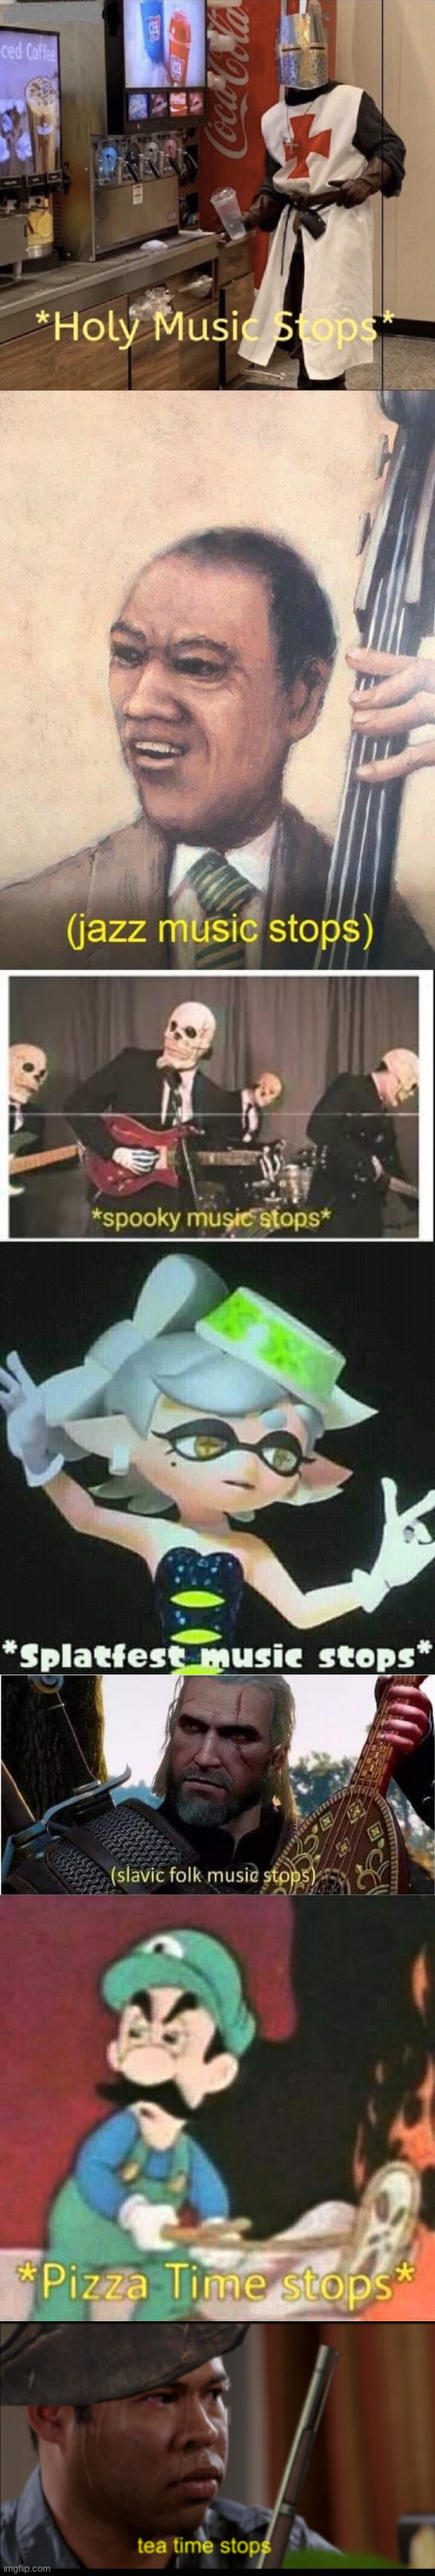 image tagged in holy music stops,jazz music stops,spooky music stops,splatfest music stops,slavic folk music stops,pizza time stops | made w/ Imgflip meme maker